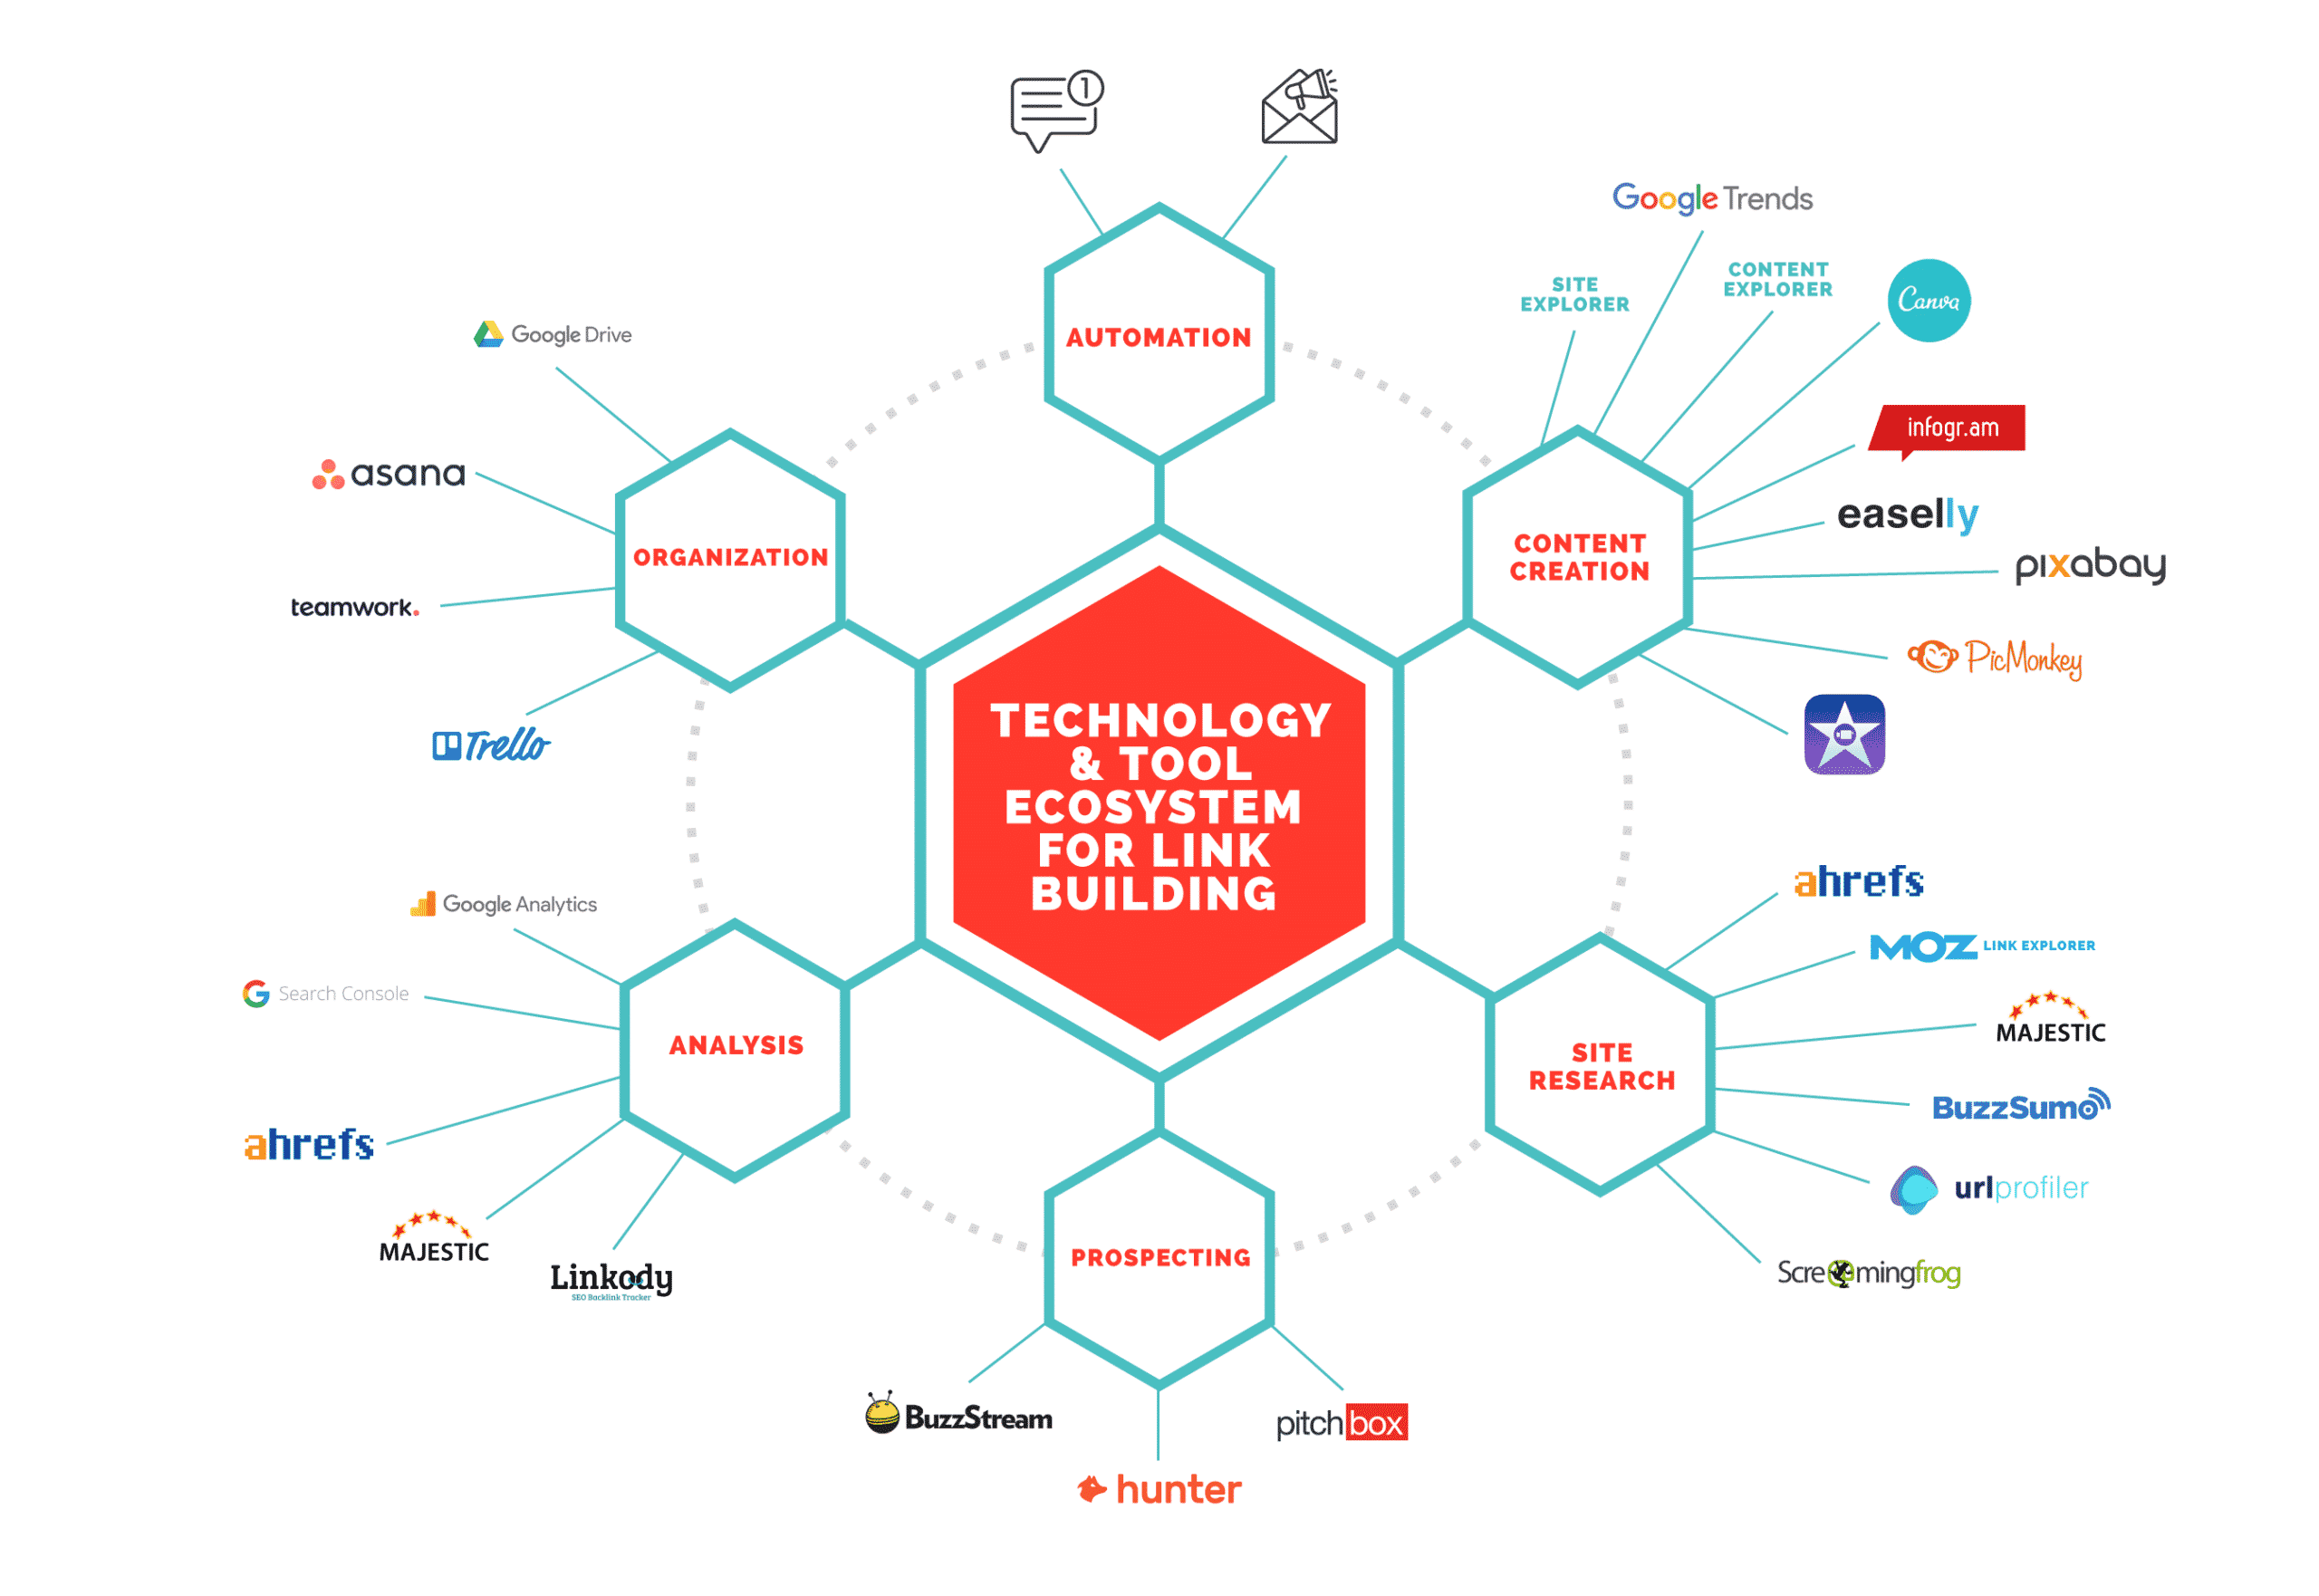 https://www.purelinq.com/wp-content/uploads/2020/07/Tech-and-Tool-Ecosystem-Infographic-v2.png